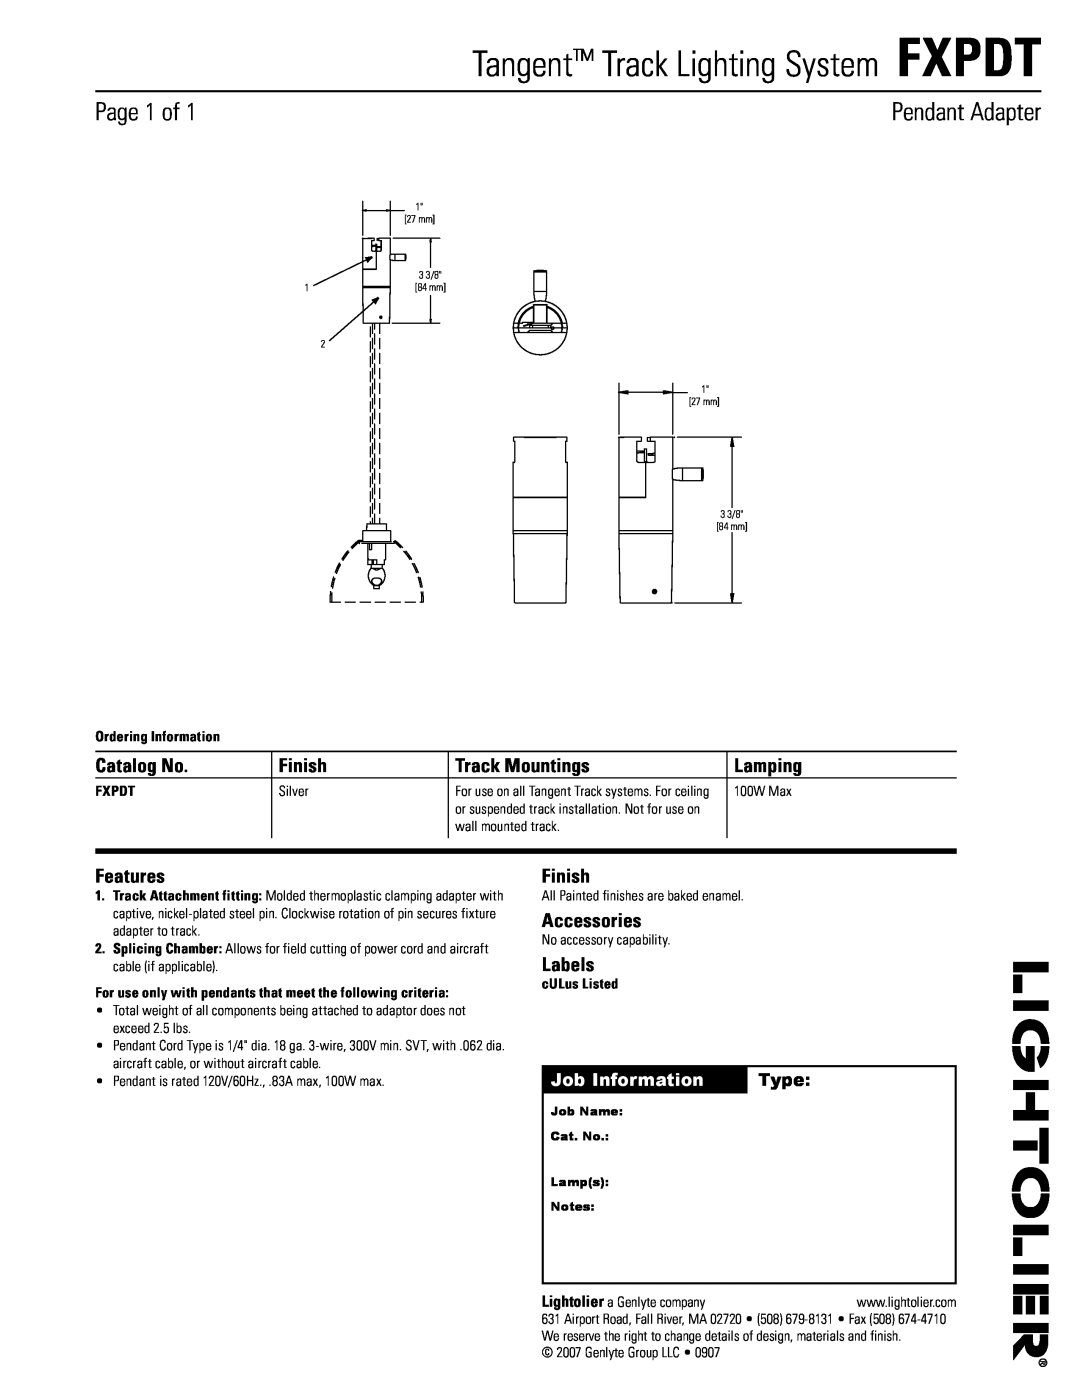 Lightolier manual Tangent Track Lighting System FXPDT, Page of, Pendant Adapter, Catalog No, Finish, Track Mountings 